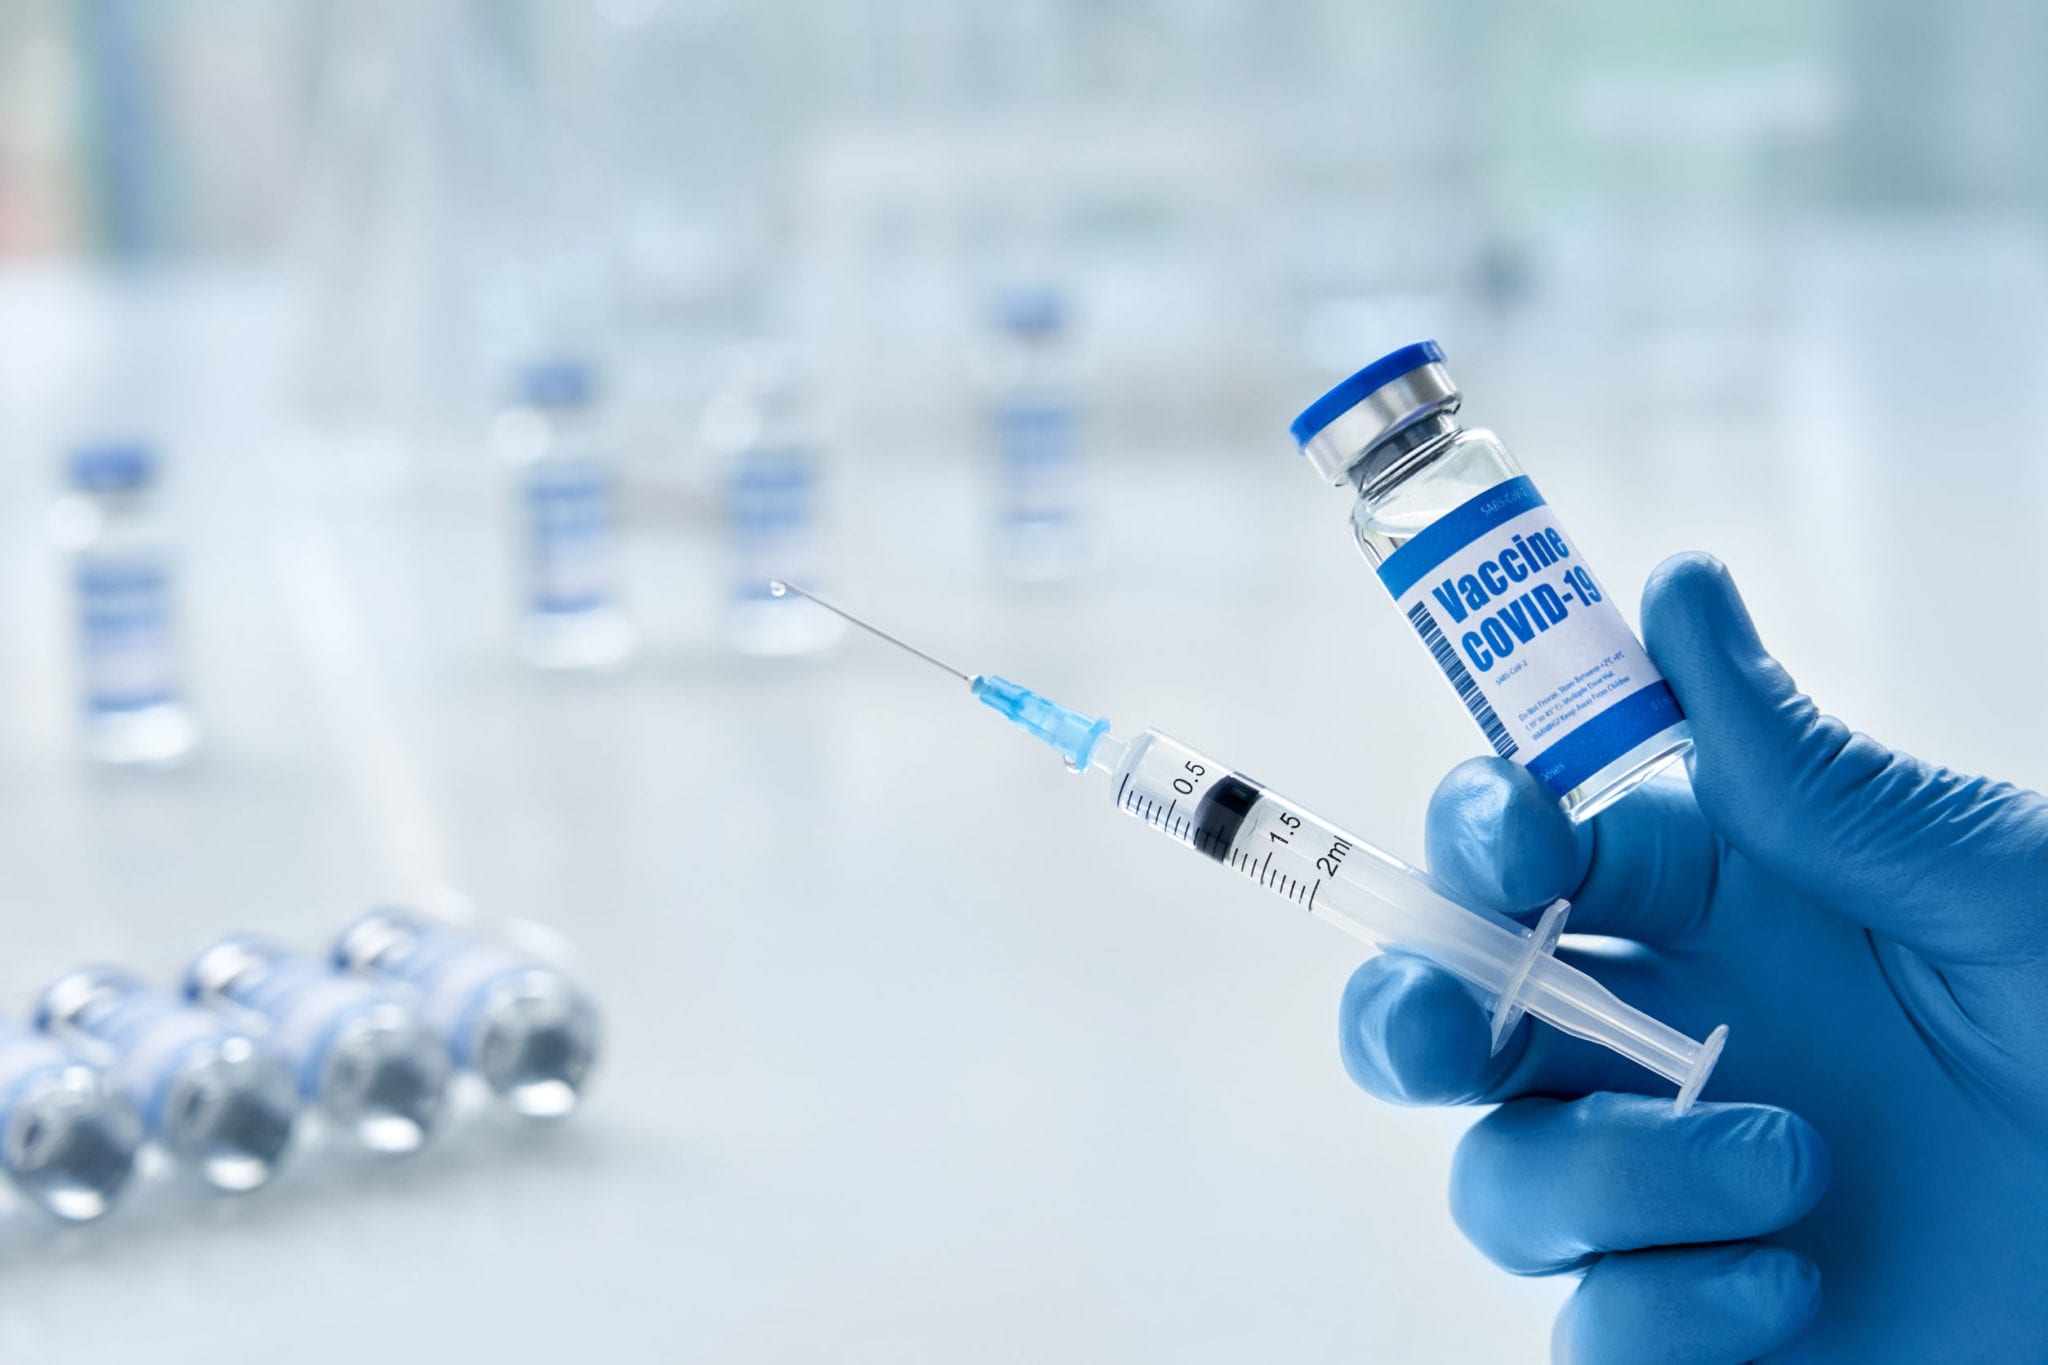 FL Facility Offers Stakeholders Early Vaccine: Illegal or Just Unfair?